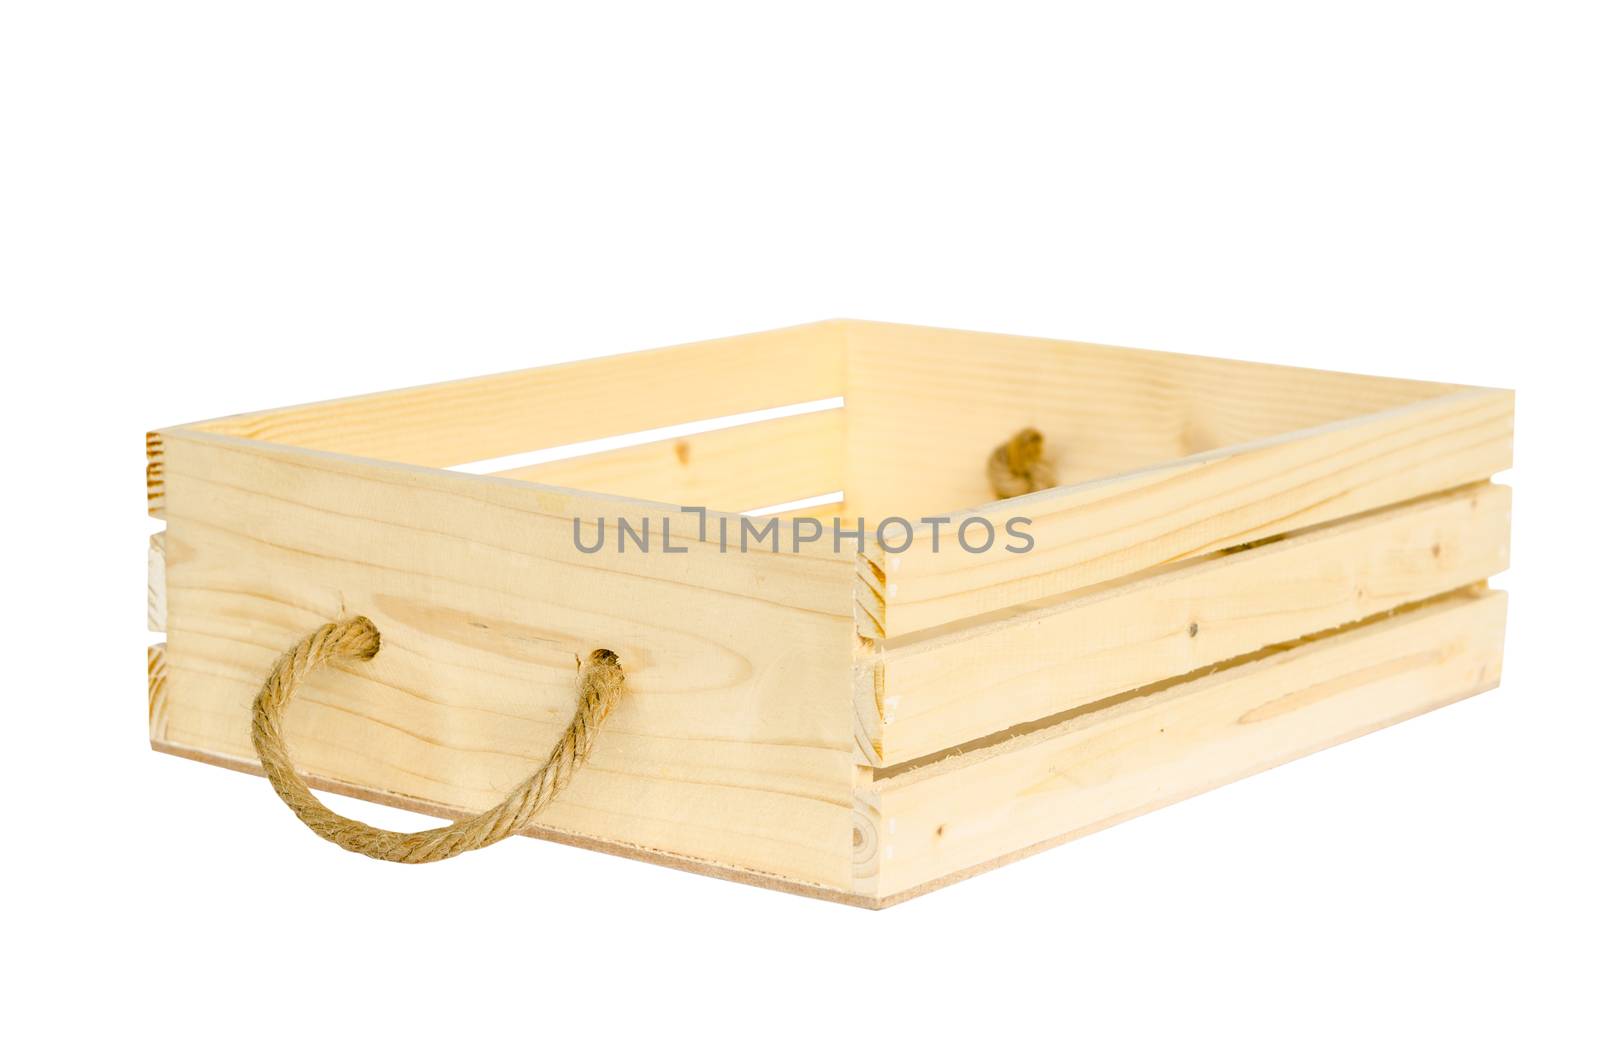 wood box gift isolated on white background, save clipping path.